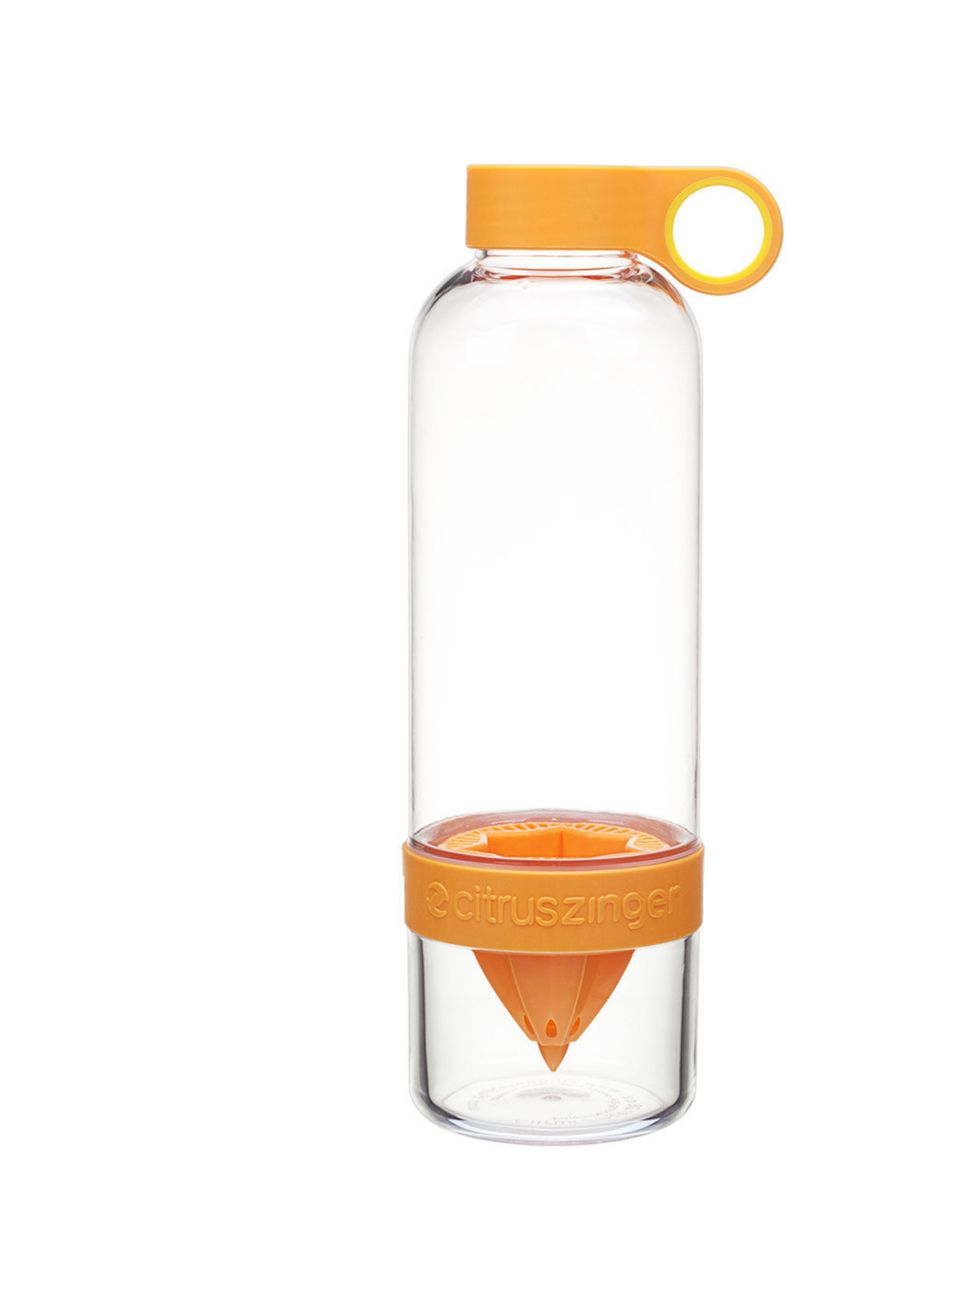 <p>A genius contraption, juice the citrus fruit of your choice in the bottom section and leave in place. Flip the bottle the right way up and fill with water. Et voila - health lemon water to hand.</p><p><a href="http://www.amazon.co.uk/Citrus-Zinger-Wate